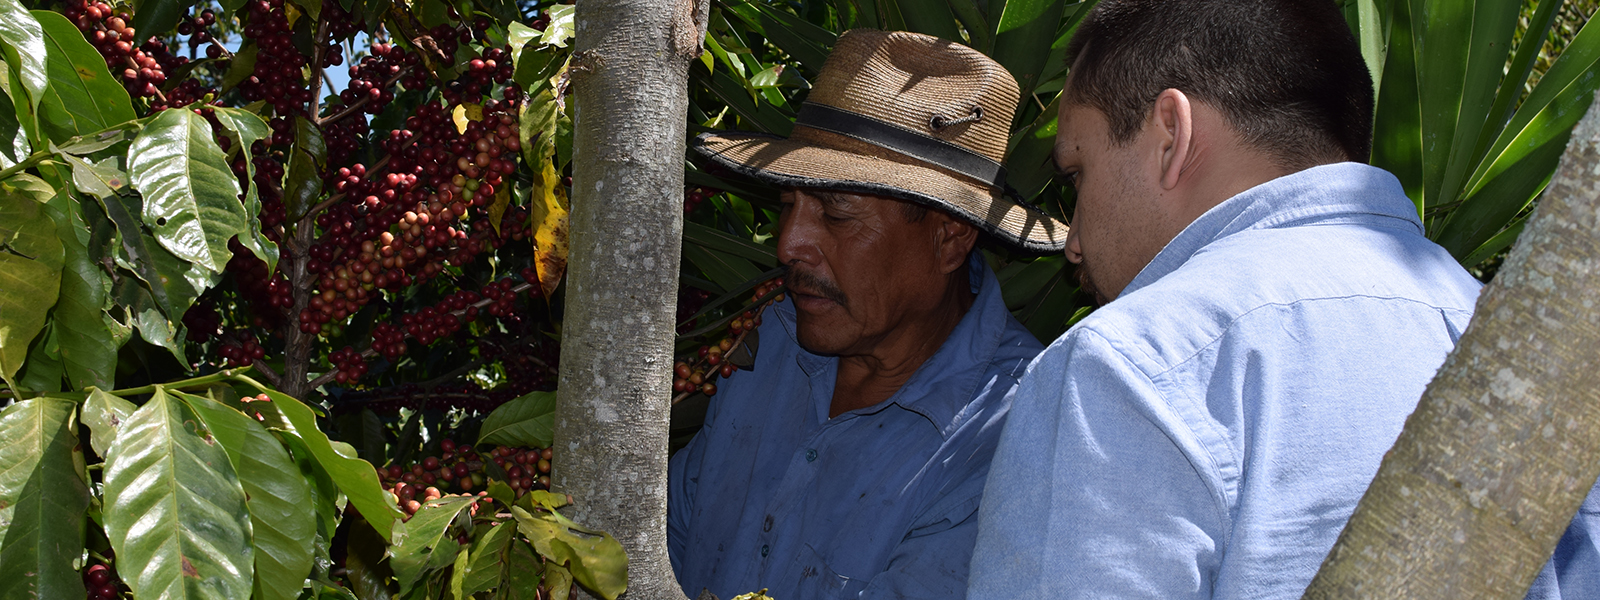 Men picking coffee beans from a coffee plant